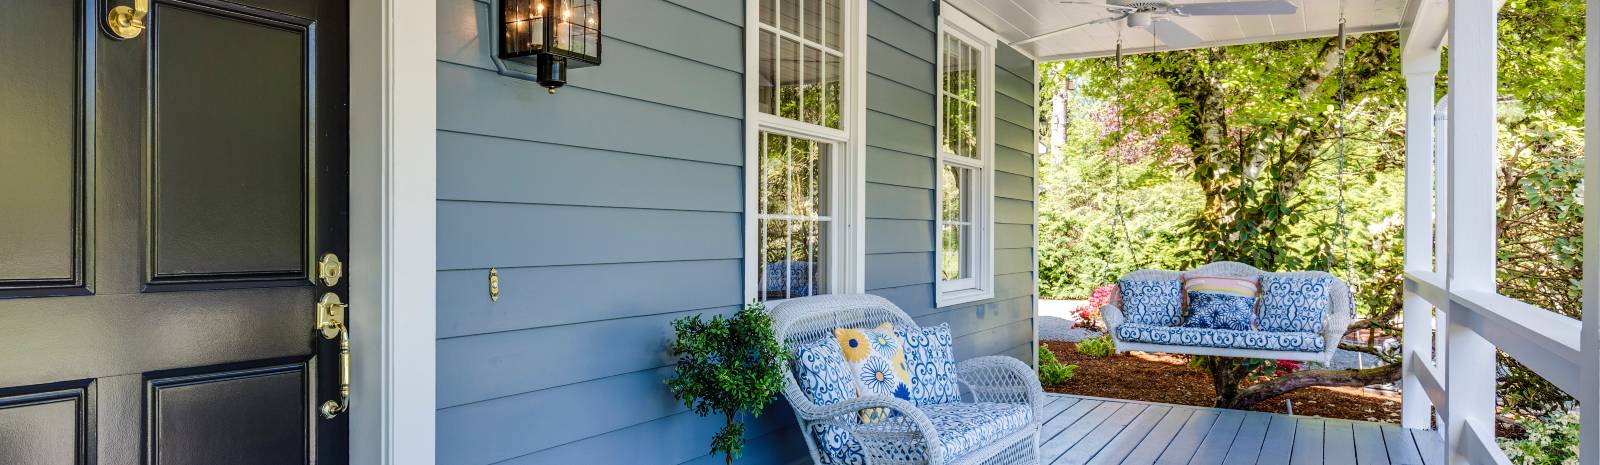 Front porch with swing and bench